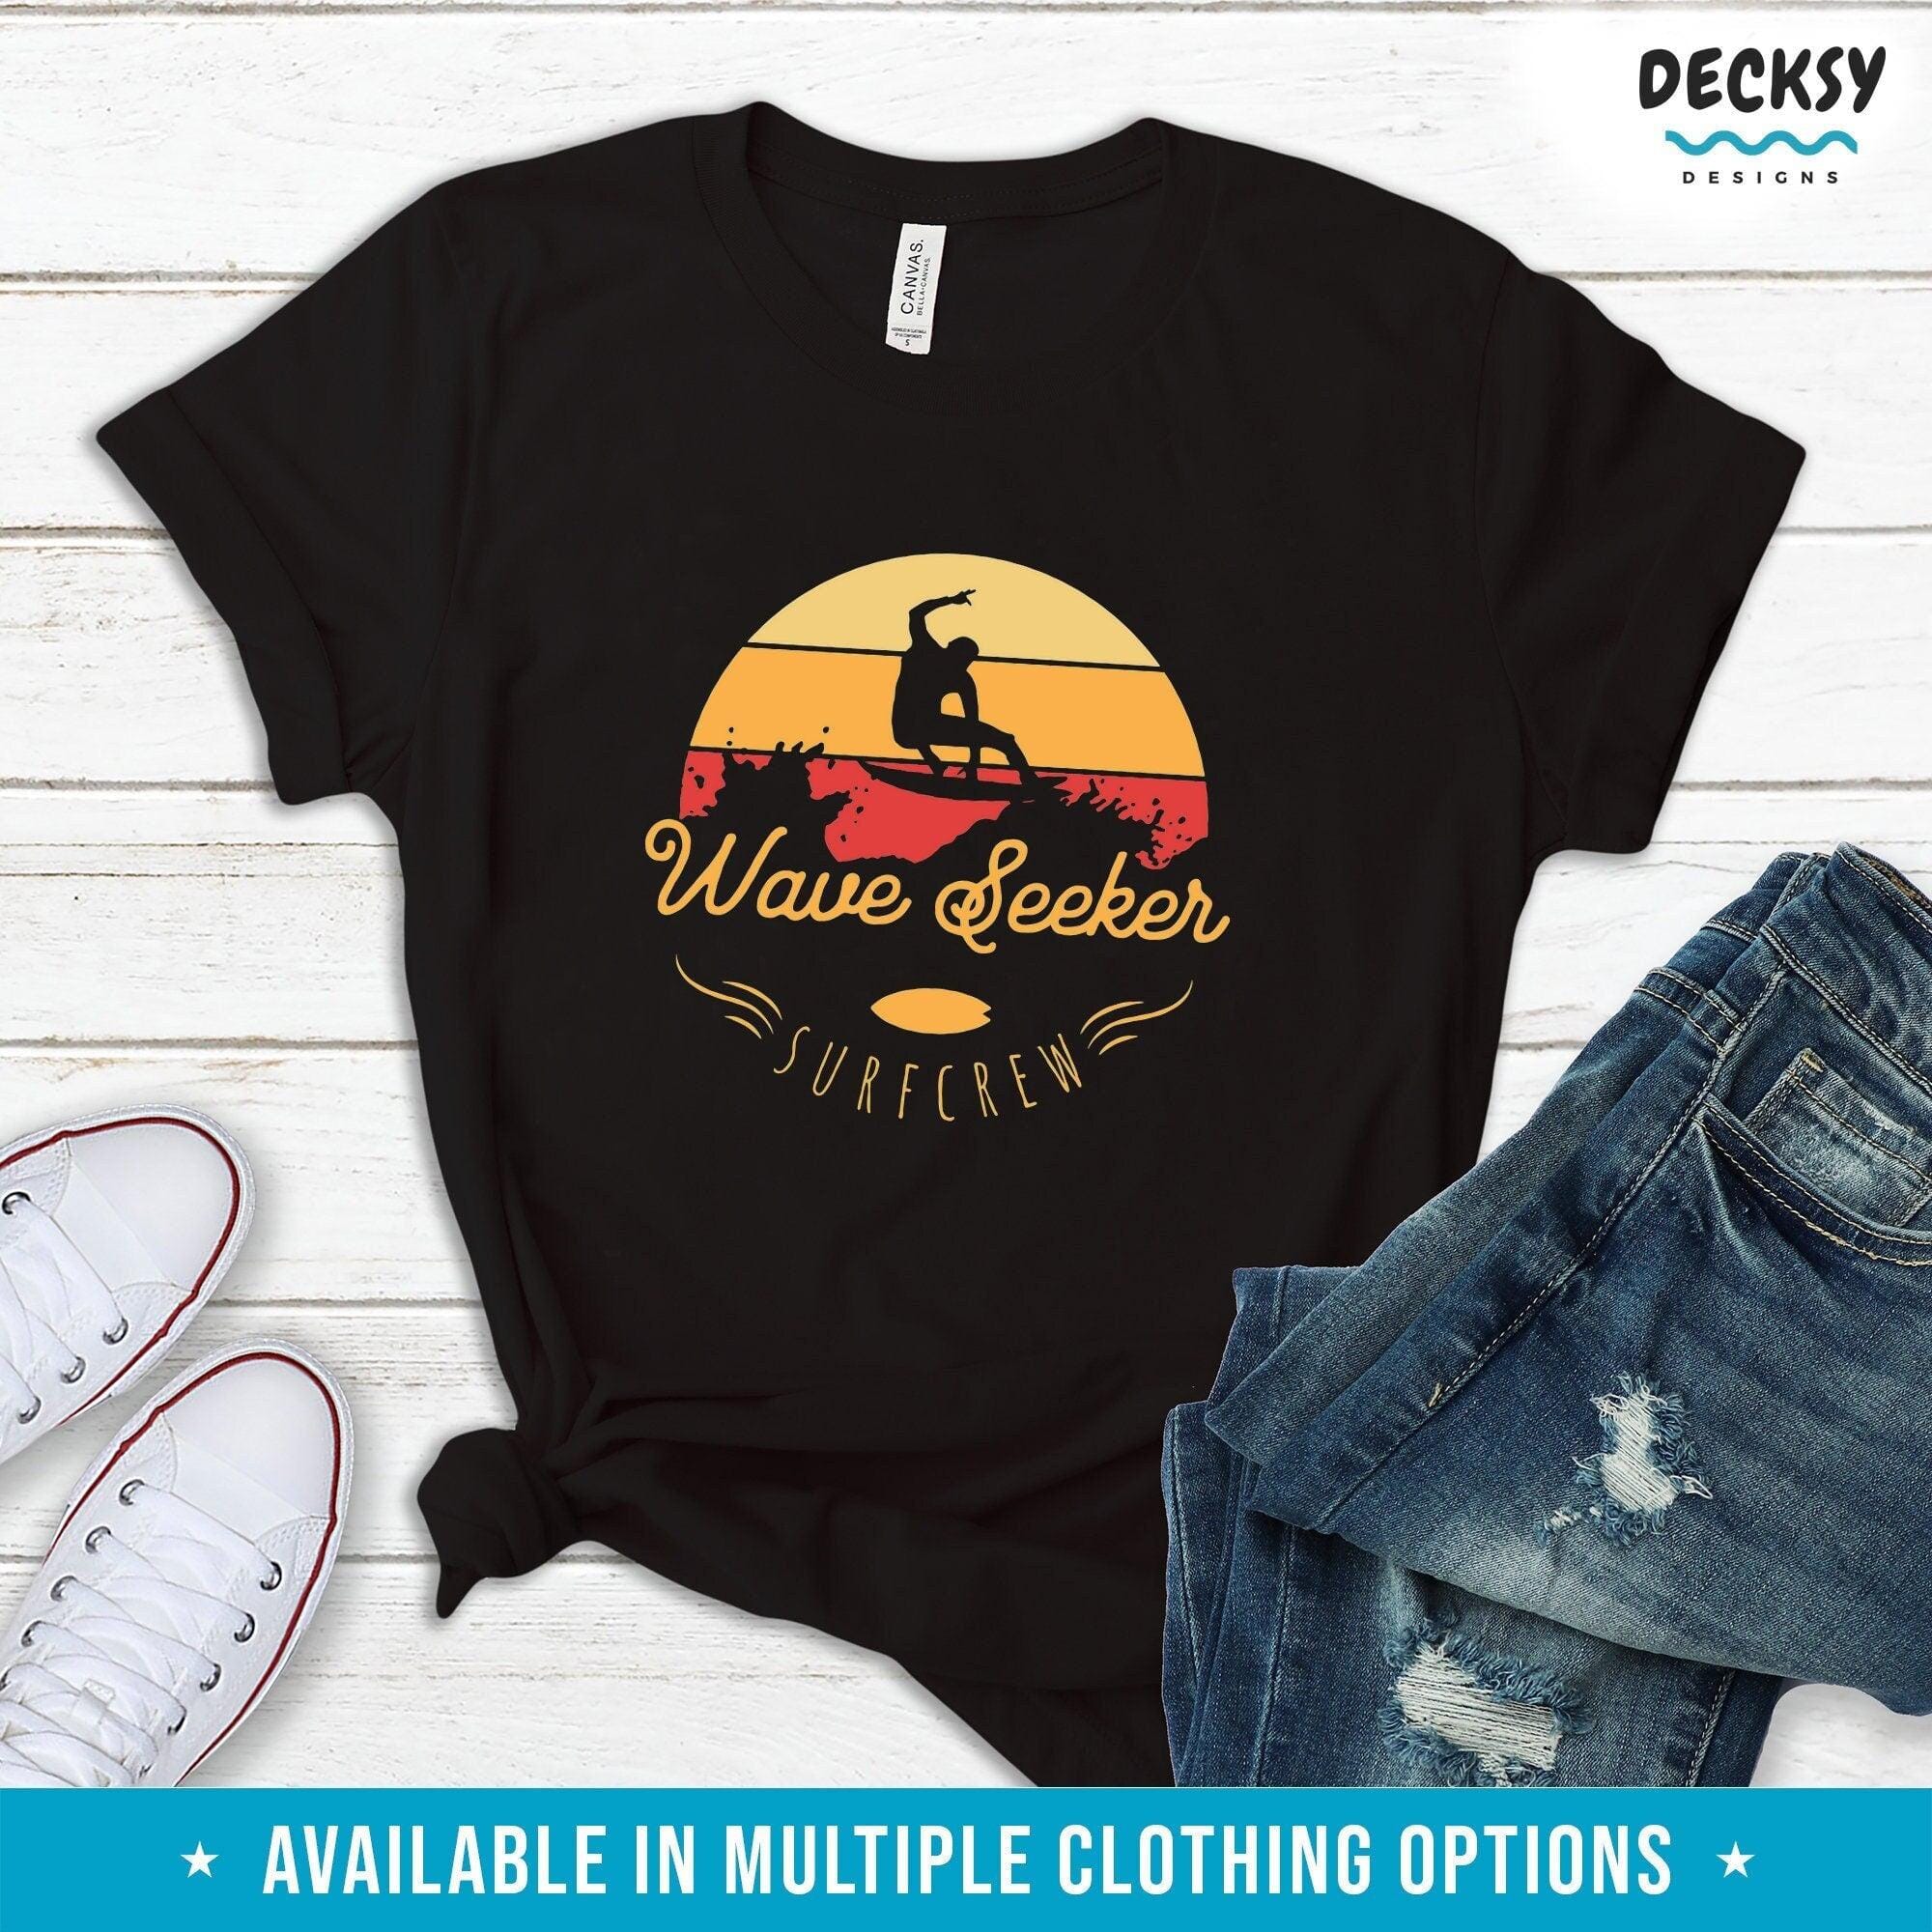 Surfing T-shirt, Gift For Surfer-Clothing:Gender-Neutral Adult Clothing:Tops & Tees:T-shirts:Graphic Tees-DecksyDesigns